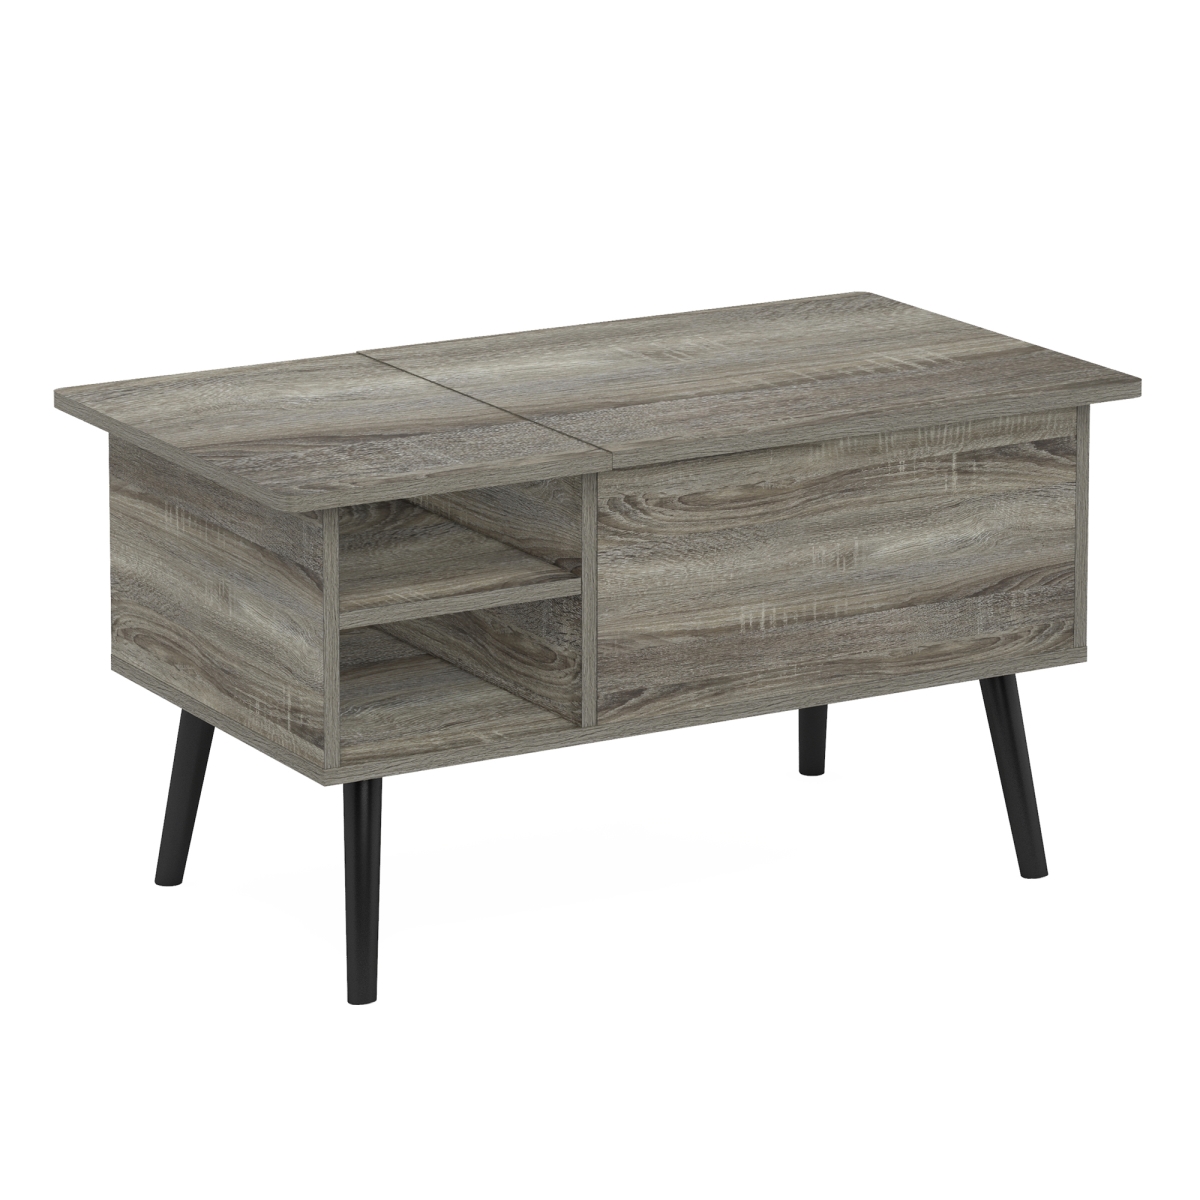 Jensen Living Room Wooden Leg Lift Top Coffee Table with Hidden Compartment & Side Open Storage Shelf, French Oak Grey -  LRL, LR3031706